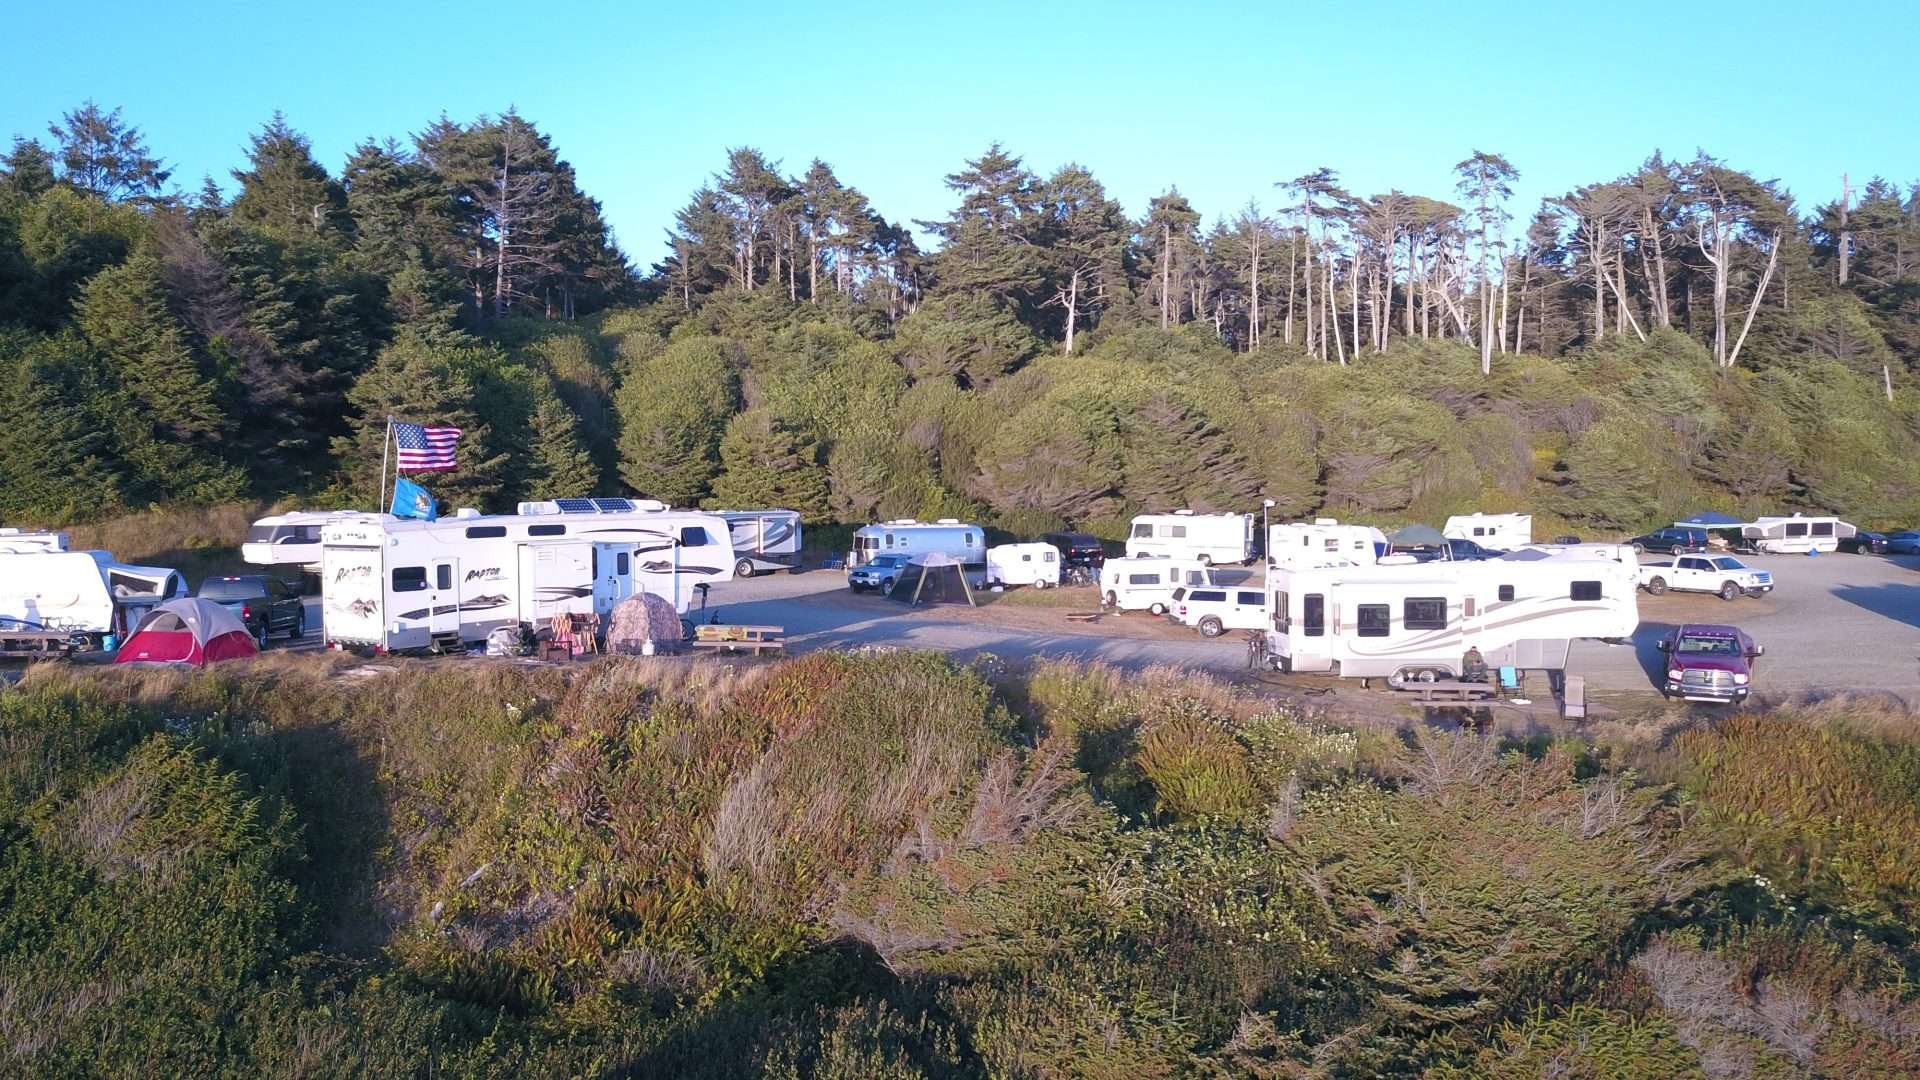 RVs parked in campsite along the beach